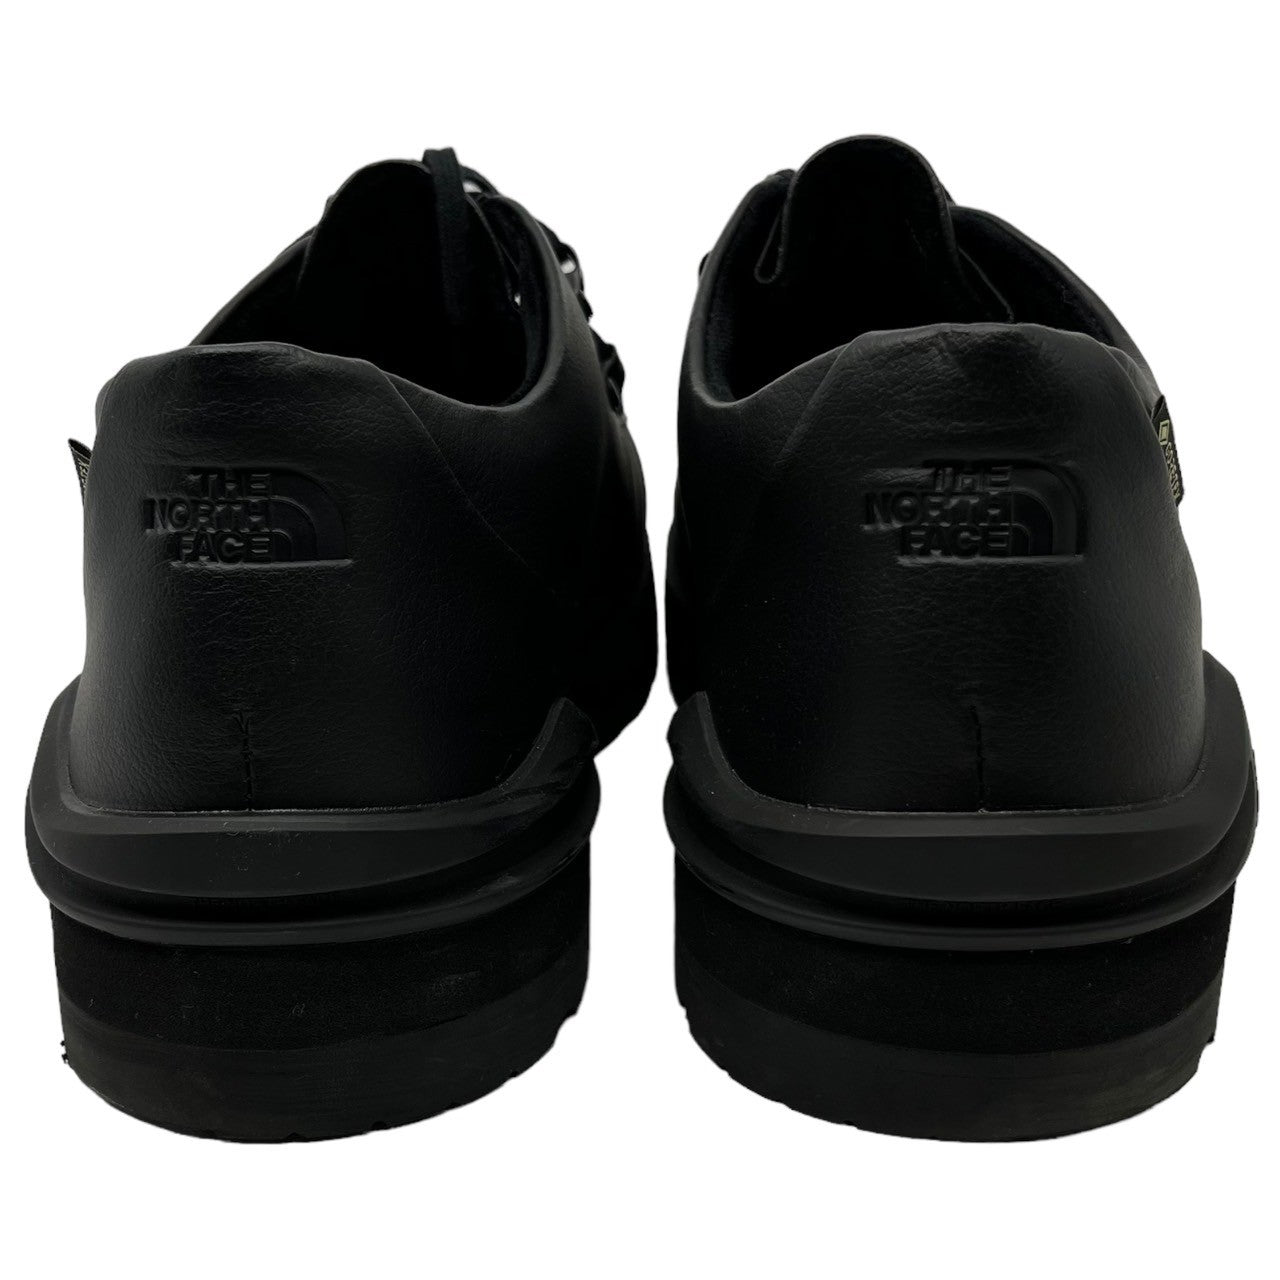 THE NORTH FACE(ザノースフェイス) Decade GORE-TEX Moccasin